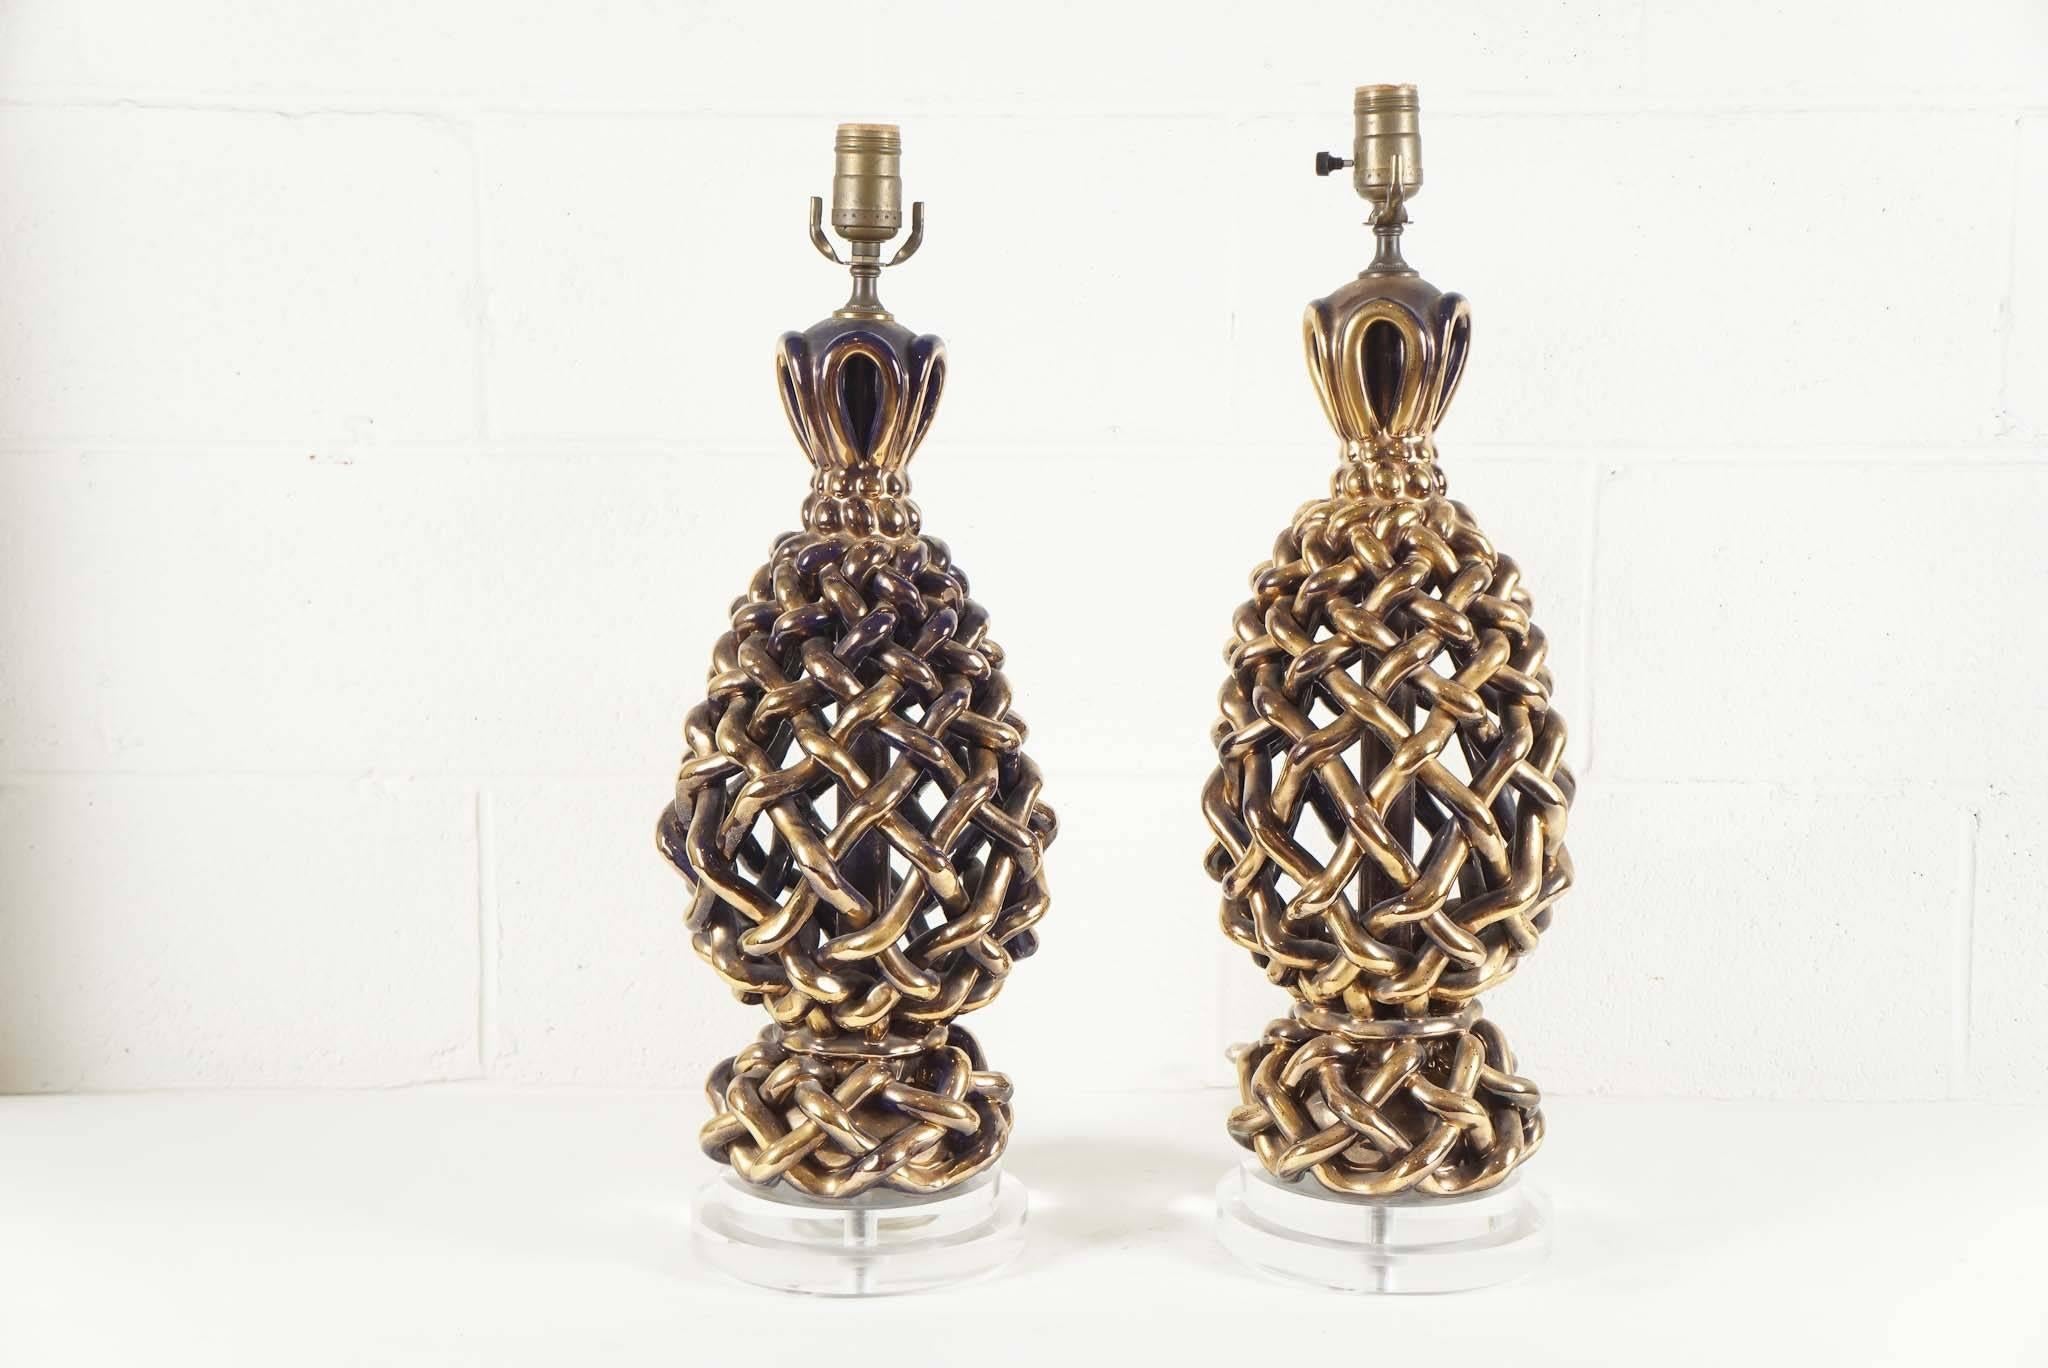 Here is an amazing pair of Italian ceramic lattice woven lamps.
The finish on the lamps is a metallic golden bronze with a hint of black.
The lamps are mounted on an inset double Lucite round base.